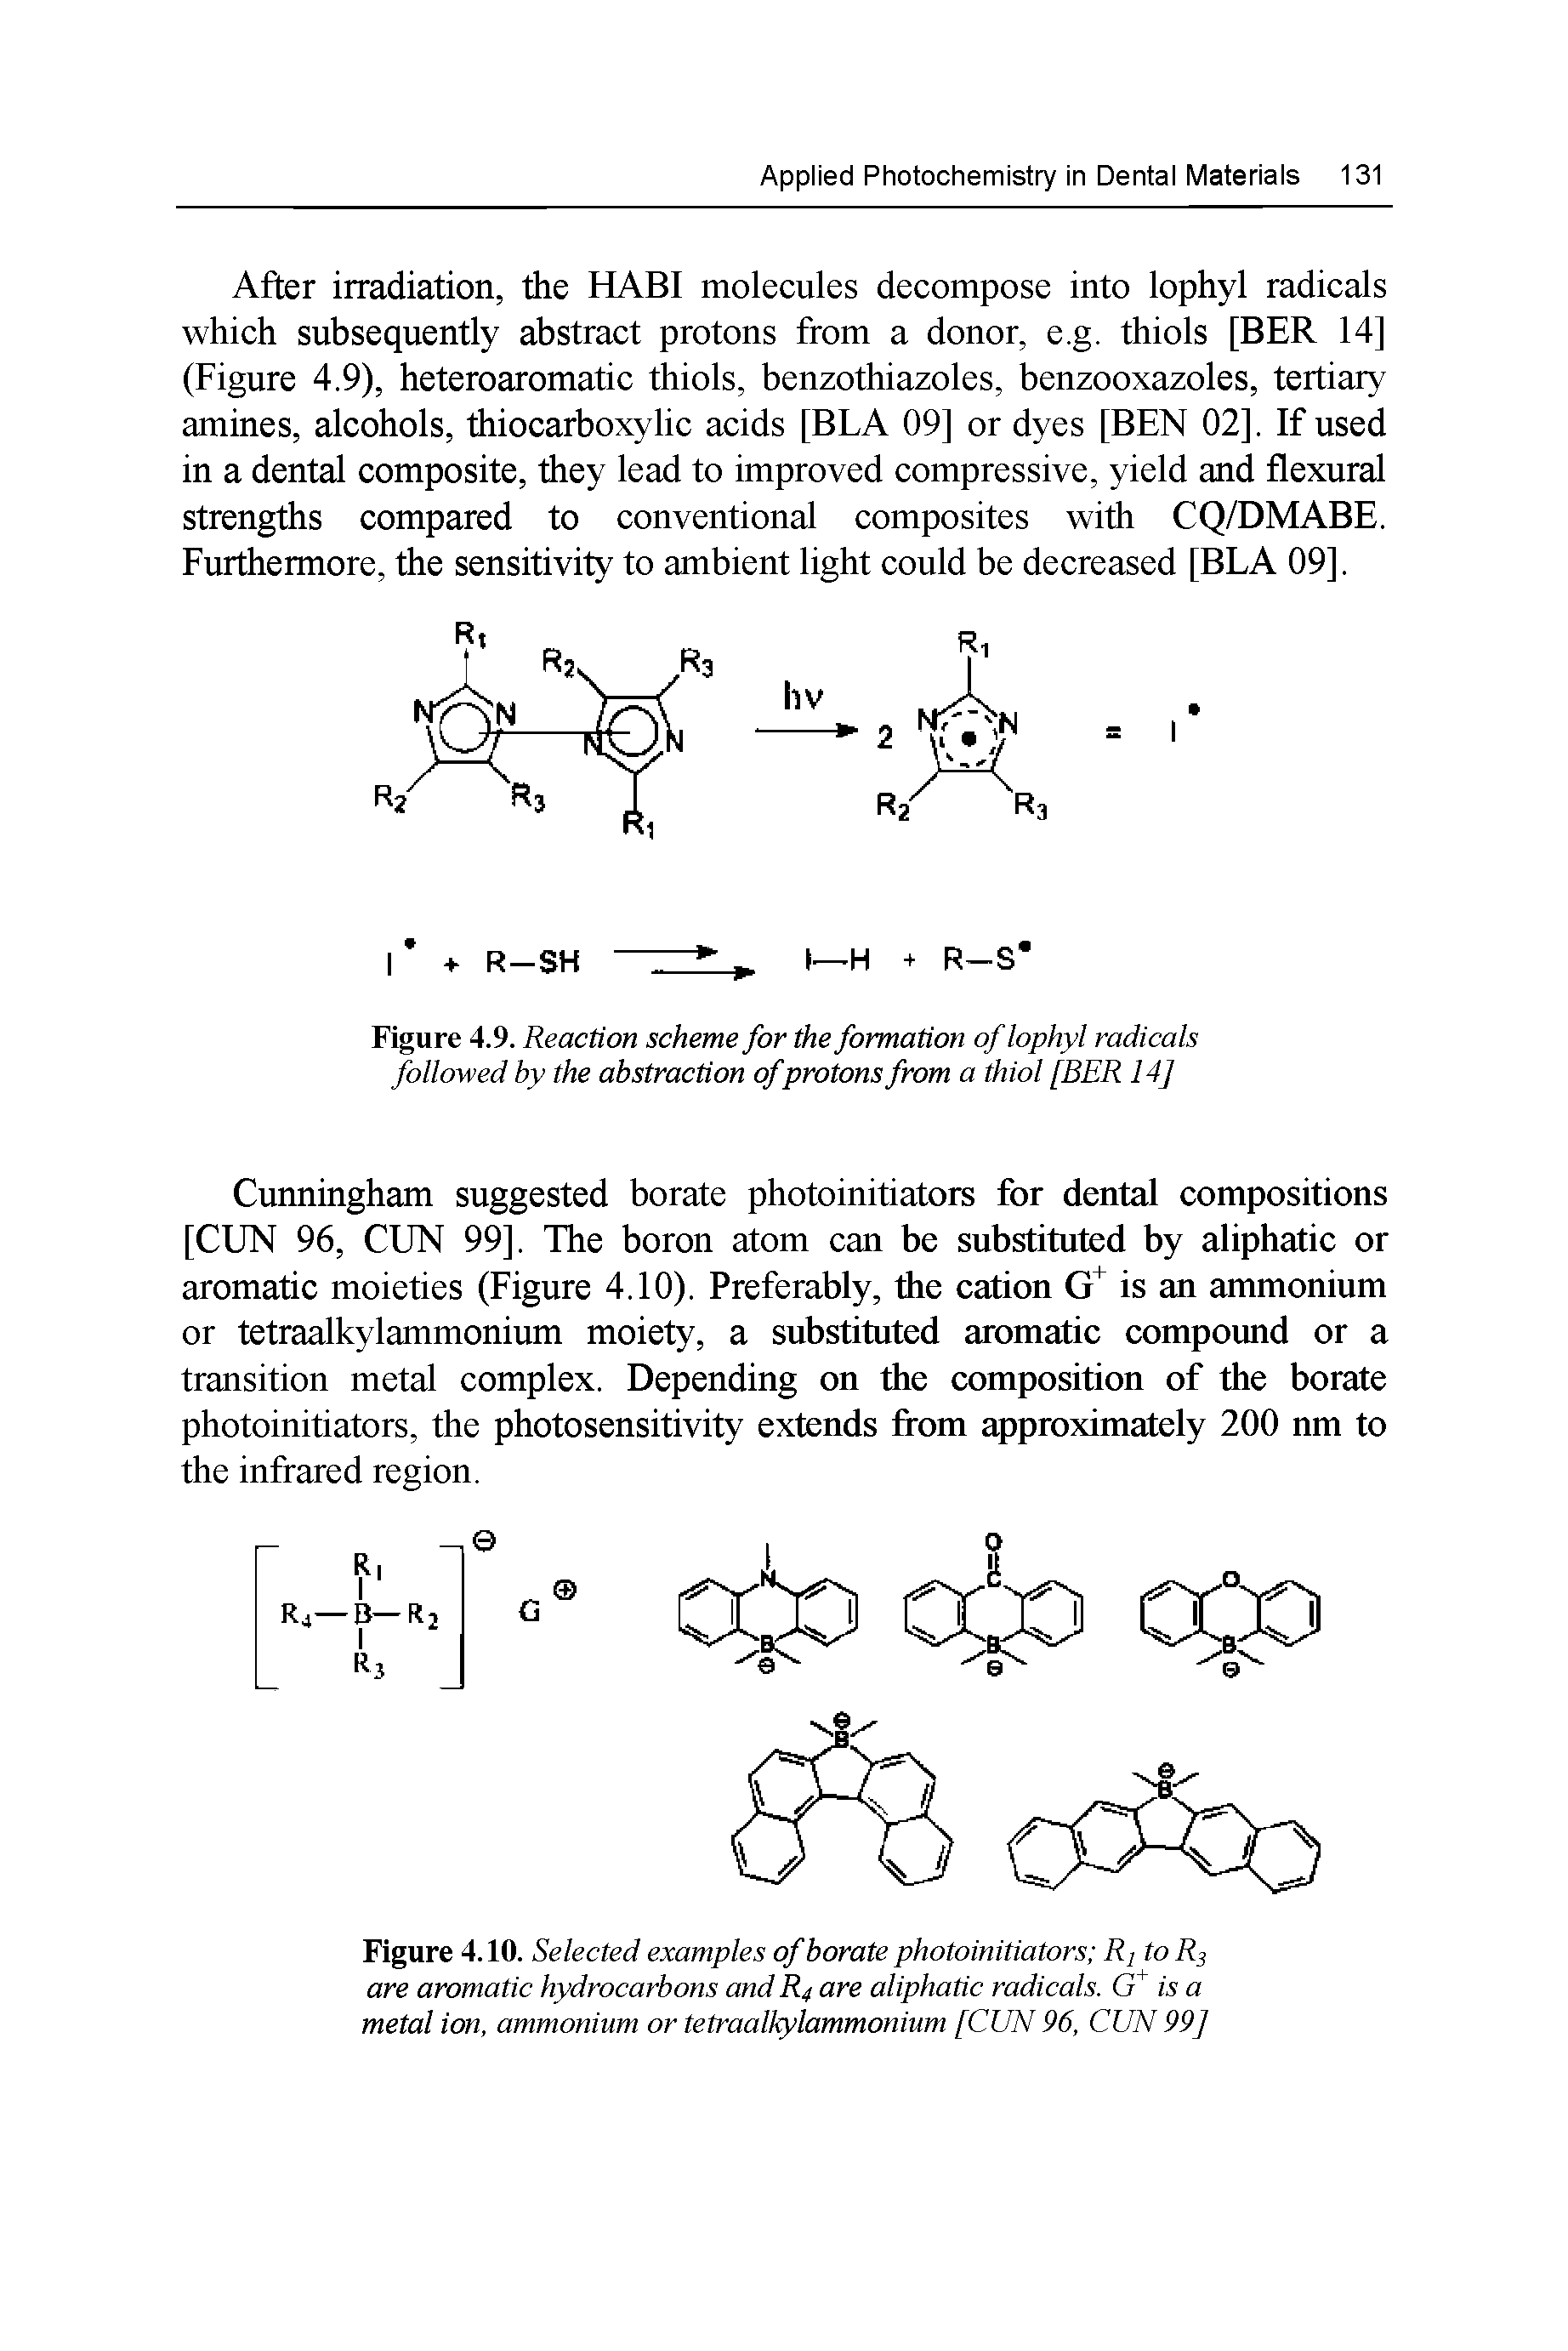 Figure 4.9. Reaction scheme for the formation of lophyl radicals followed by the abstraction ofprotons from a thiol [BER 14]...